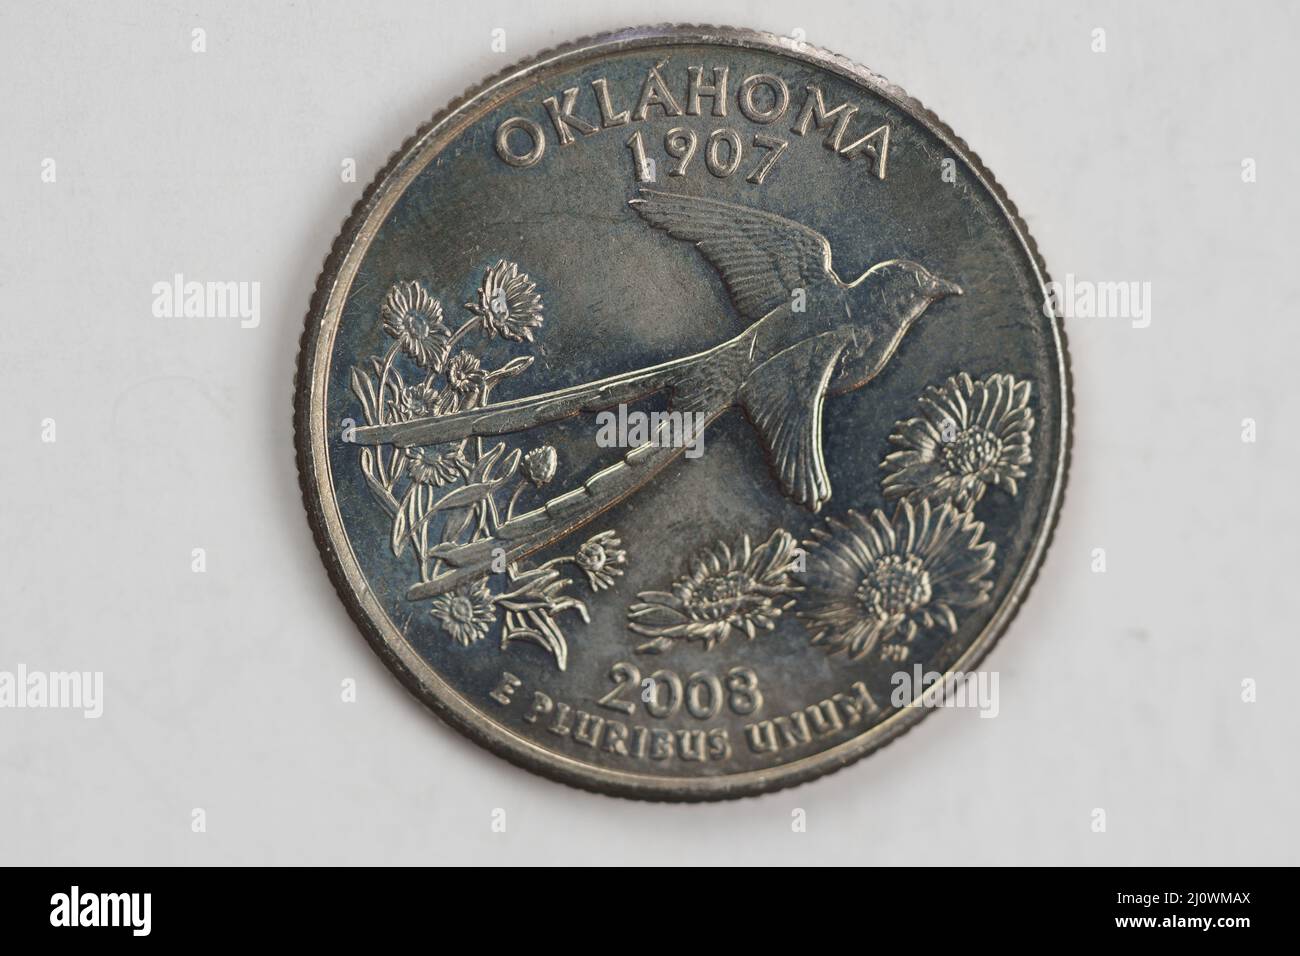 A quarter dollar (25 cents) coin with the image of Oklahoma (the Sooner State), USA. Stock Photo